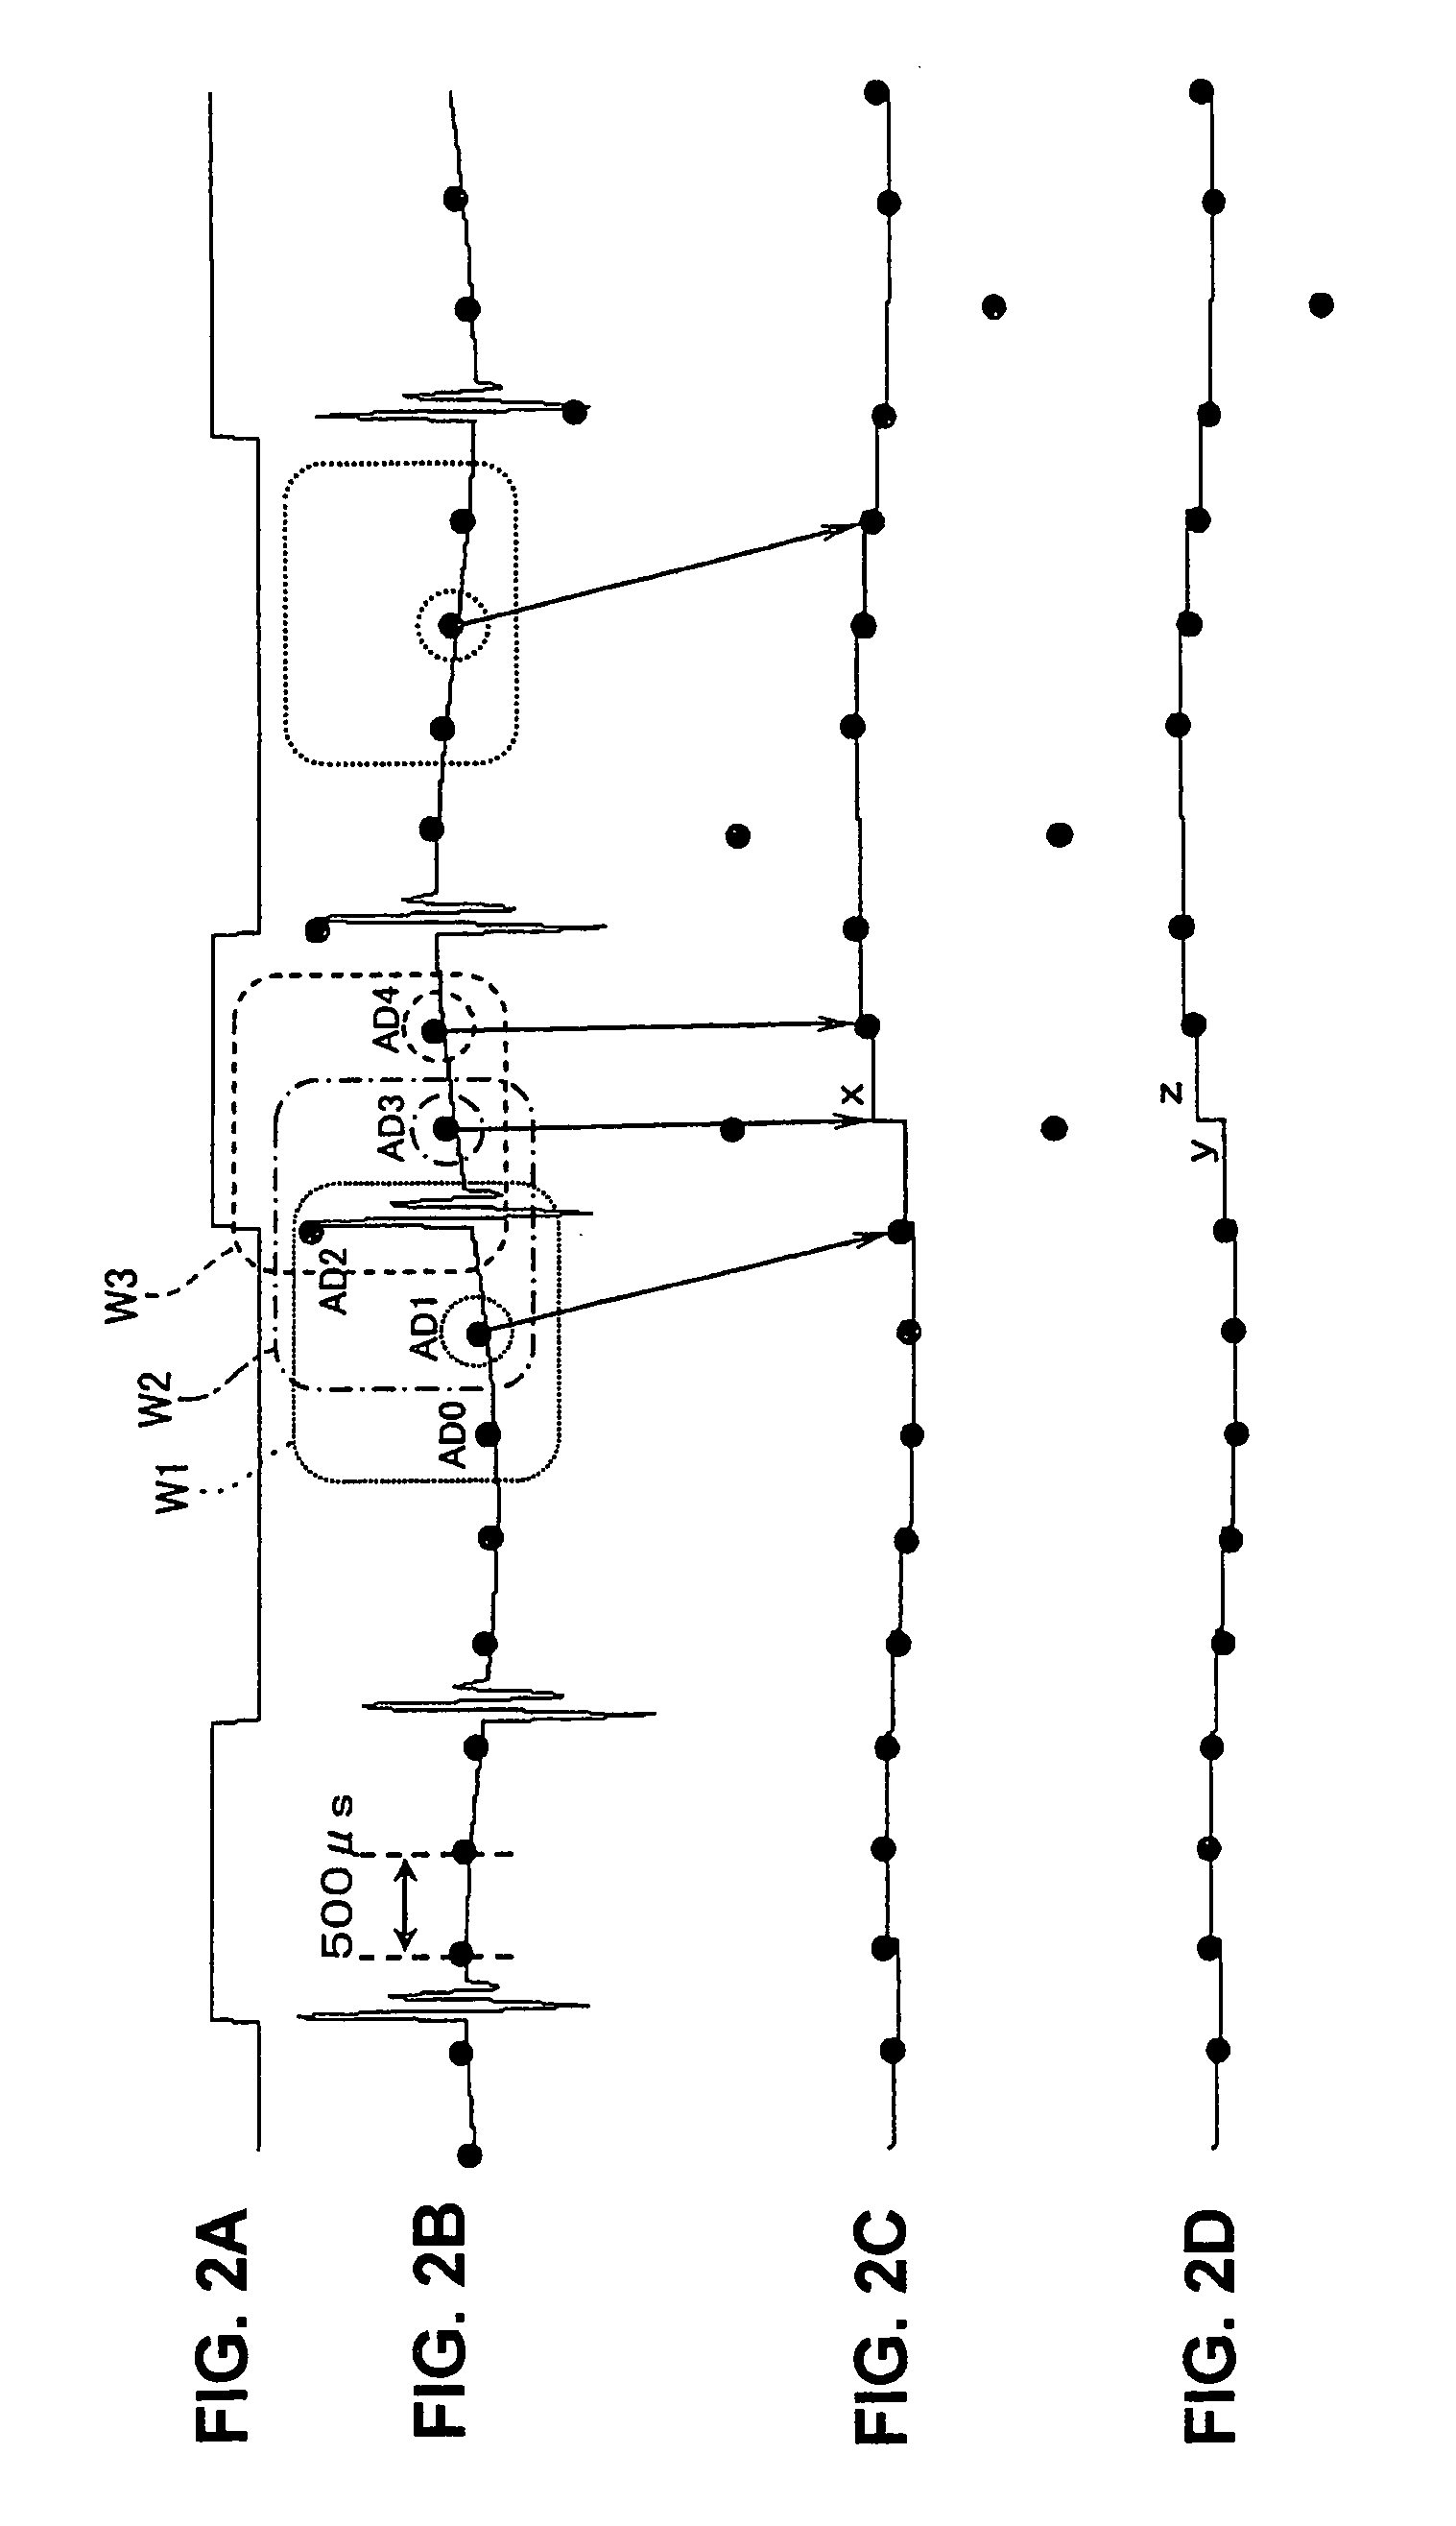 A/D conversion processing apparatus providing improved elimination of effects of noise through digital processing, method of utilizing the A/D conversion processing apparatus, and electronic control apparatus incorporating the A/D conversion processing apparatus